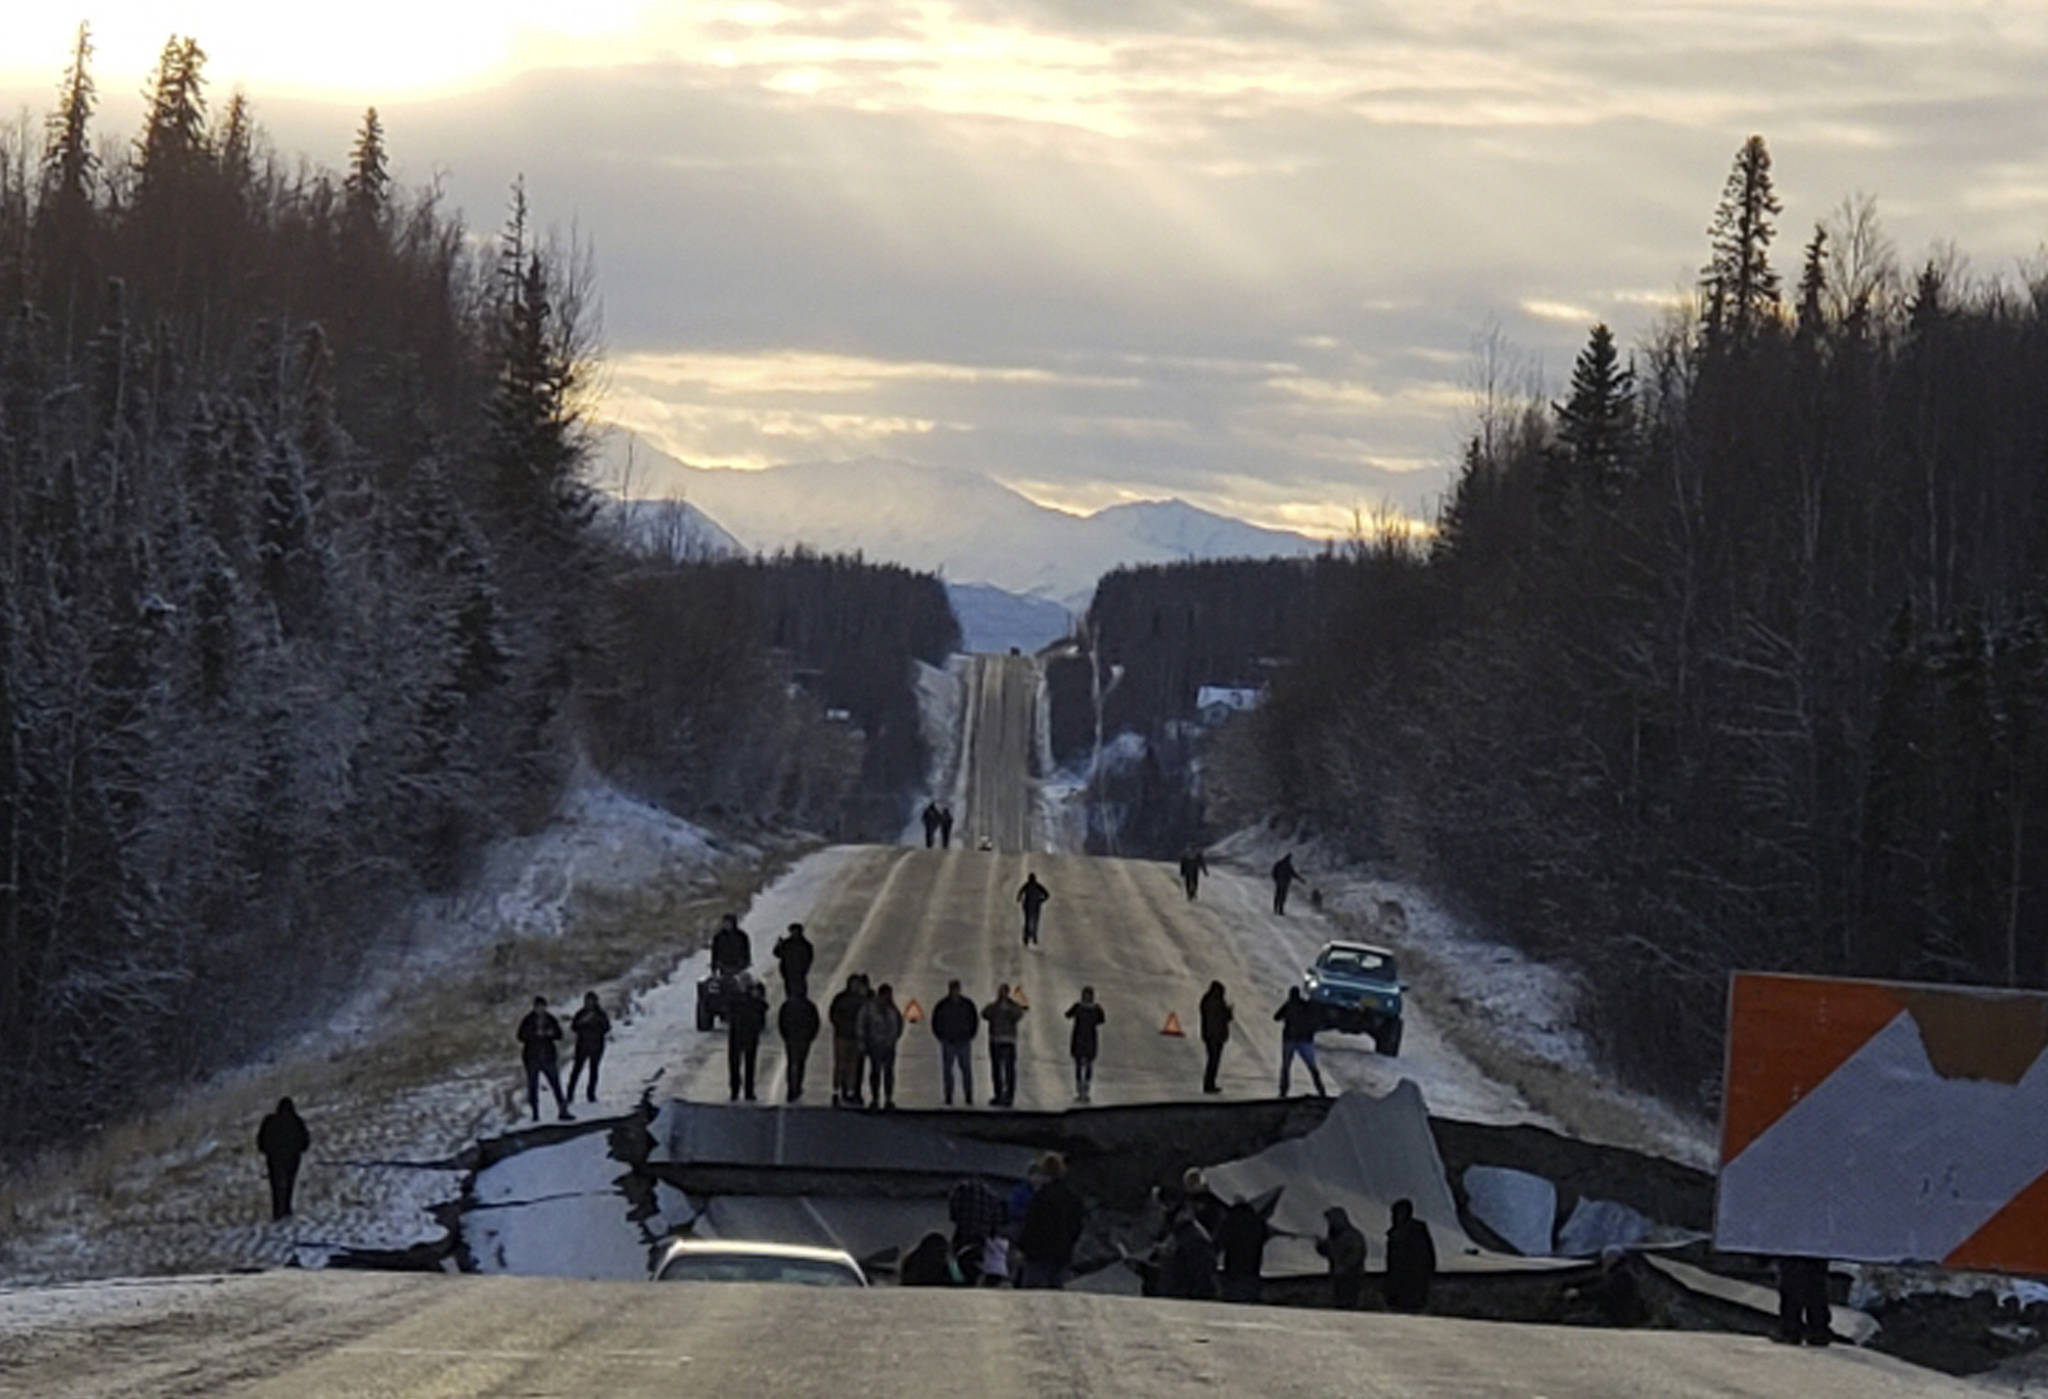 In this Nov. 30, 2018 file photo, provided by Jonathan M. Lettow, people walk along Vine Road after an earthquake in Wasilla, Alaska. Alaska State Troopers are asking that people do not take selfies in front of the buckled roadway north of Anchorage, Alaska. (Jonathan M. Lettow via AP, File)